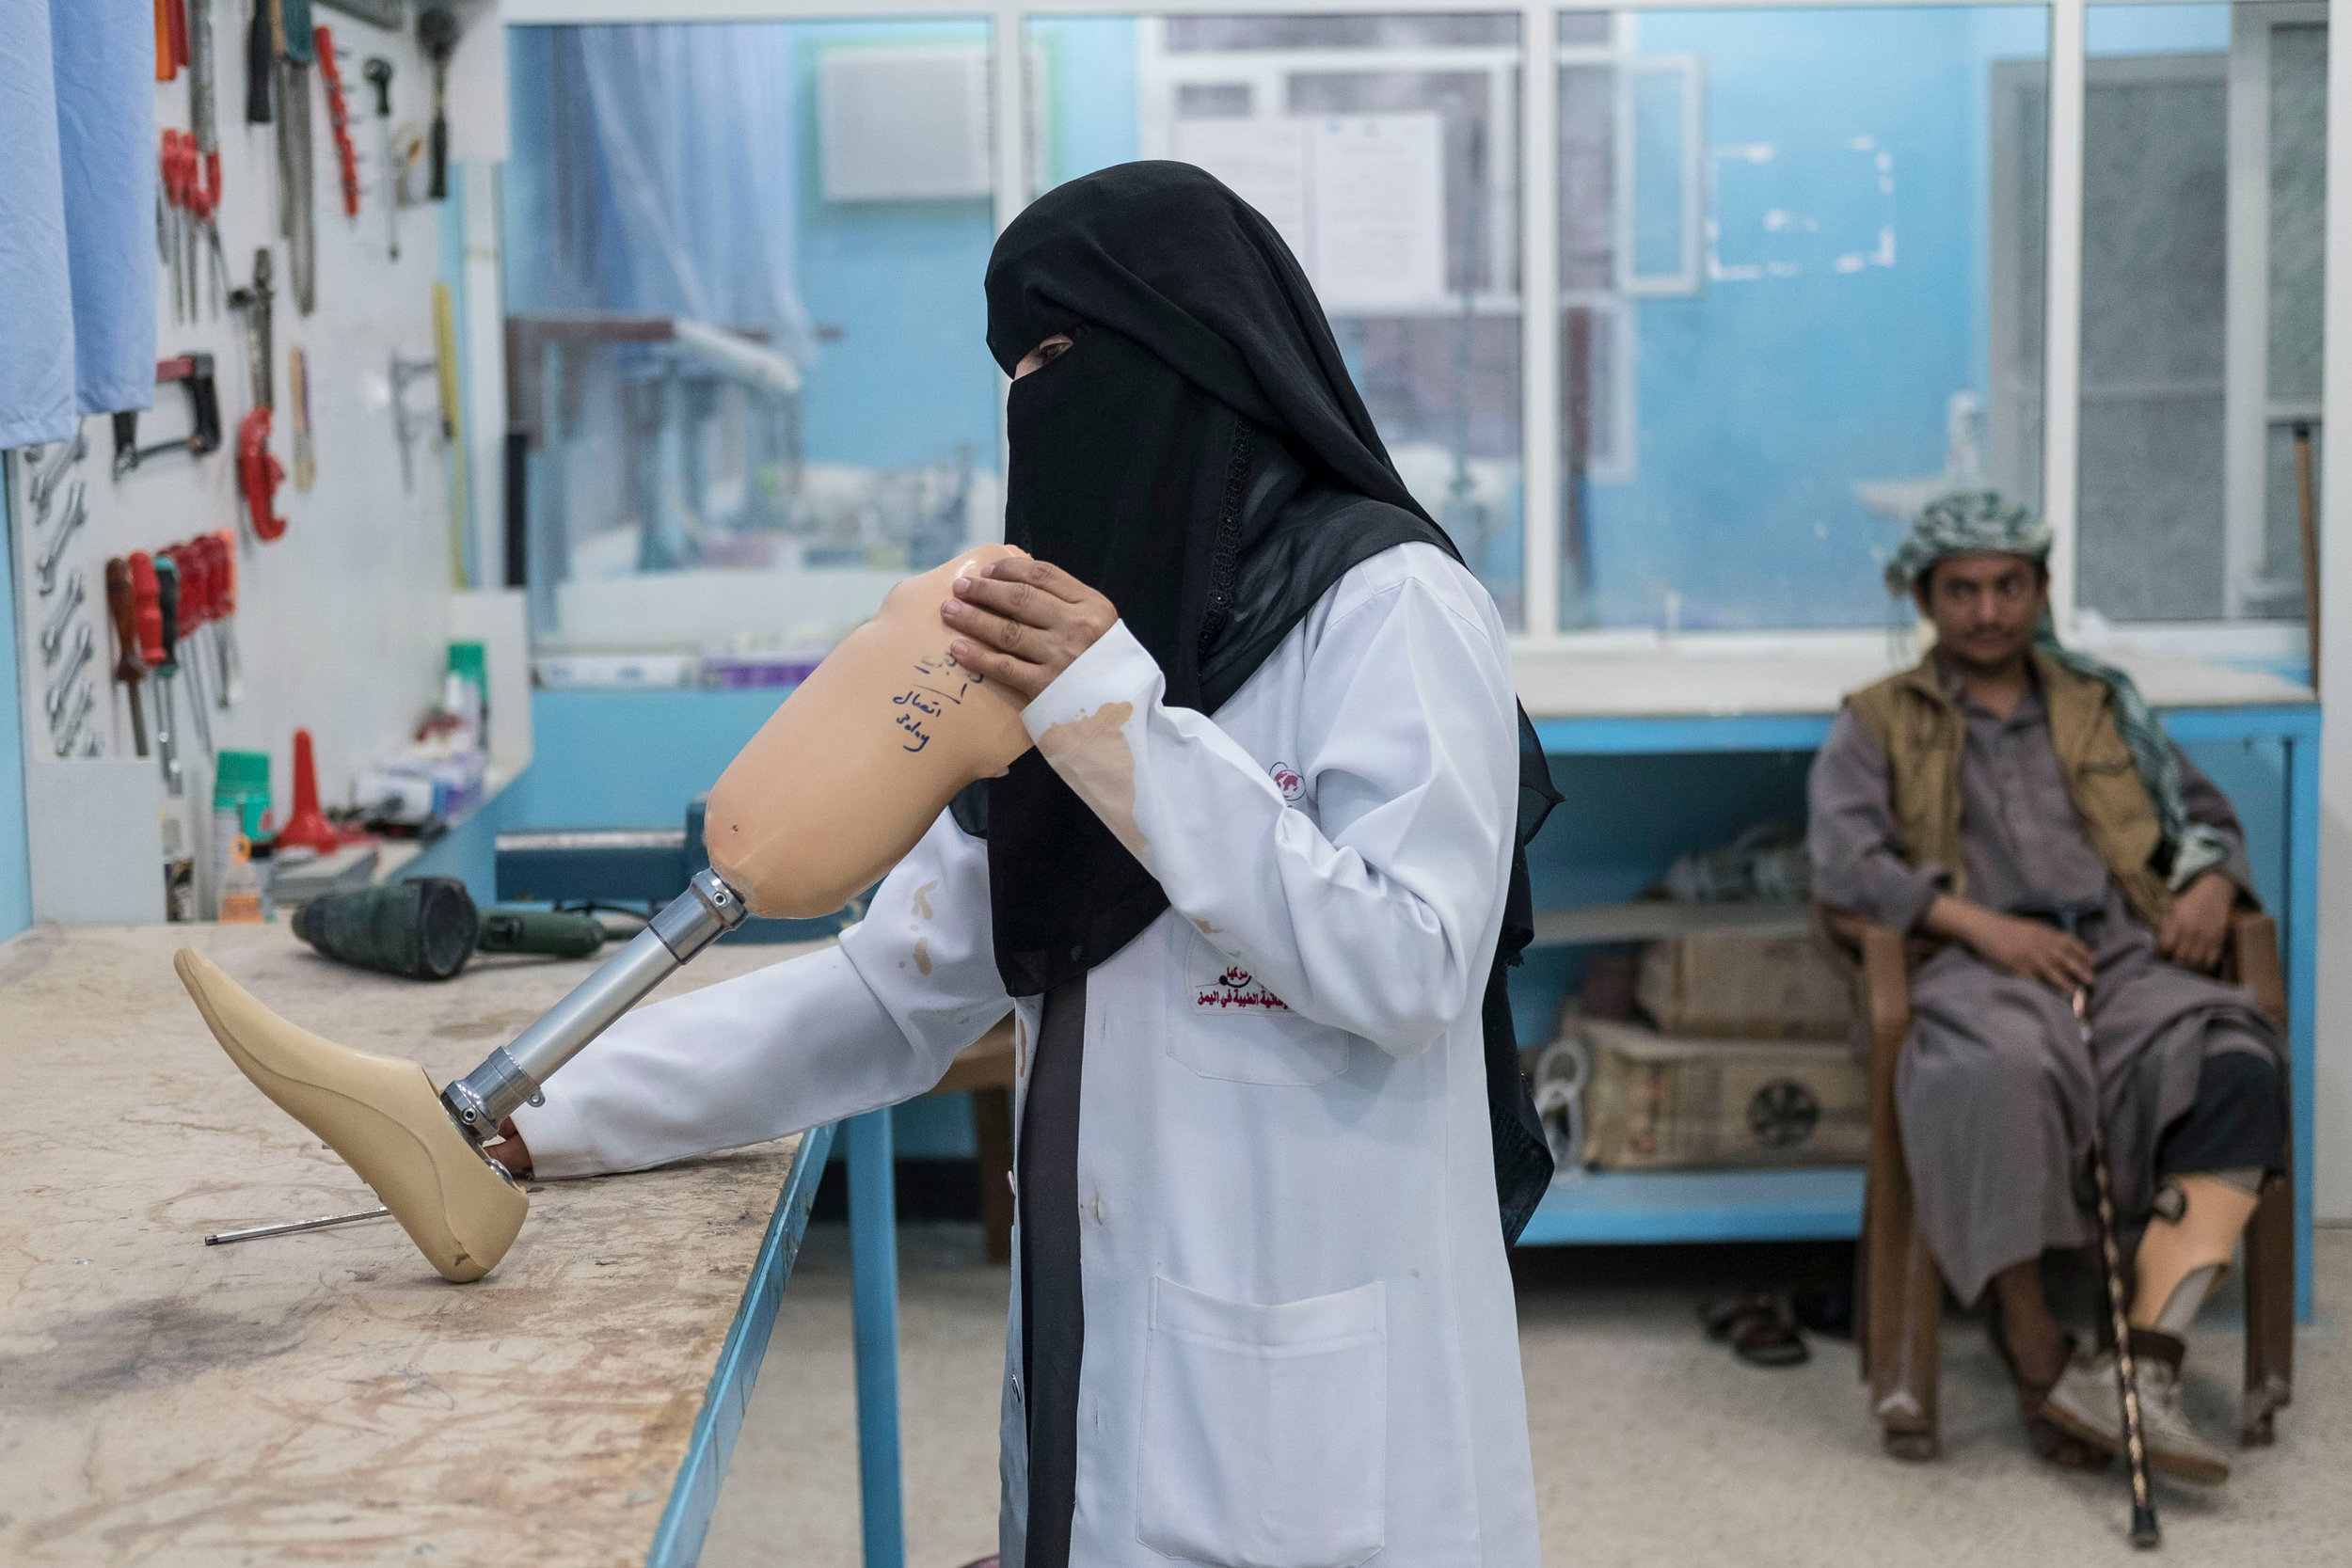  Fayda Ali Ali, a nurse trained in prosthetics adjusts a limb in the orthopaedic ward of a hospital in the government held town of Marib, over 100 miles from the county's capital Sanaa which is in the hands of the Houthi rebels.
Photo by Heathcliff O